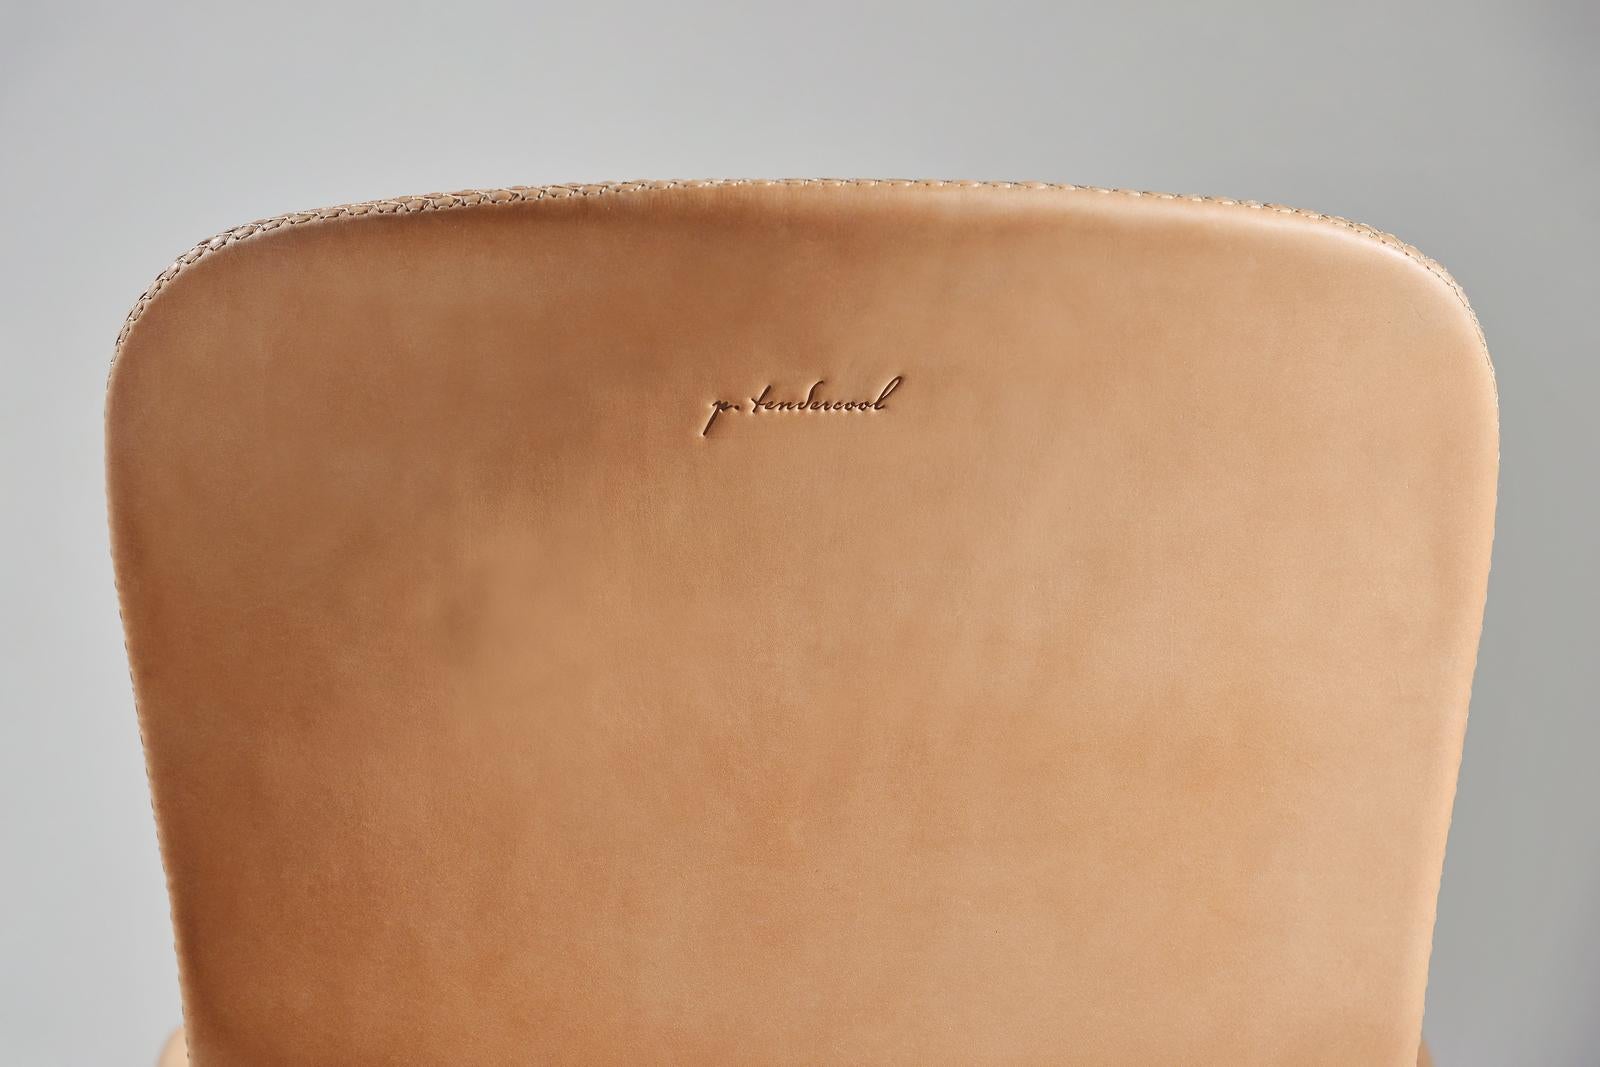 Contemporary Bespoke Sand Cast Brass Chair in Châtaigne 'Mid Brown' Leather, by P. Tendercool For Sale